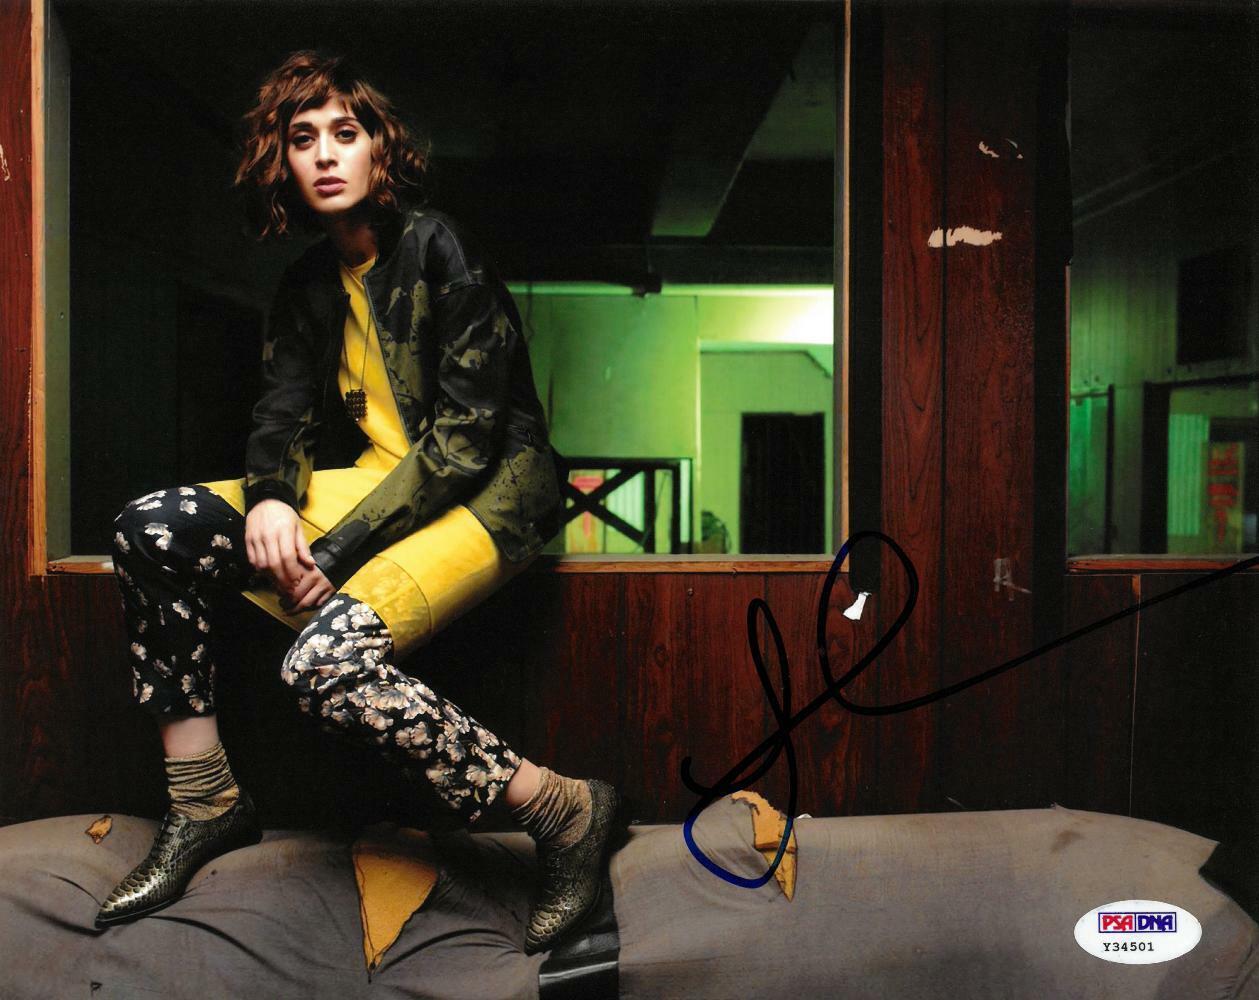 Lizzy Caplan Signed Authentic Autographed 8x10 Photo Poster painting PSA/DNA #Y34501